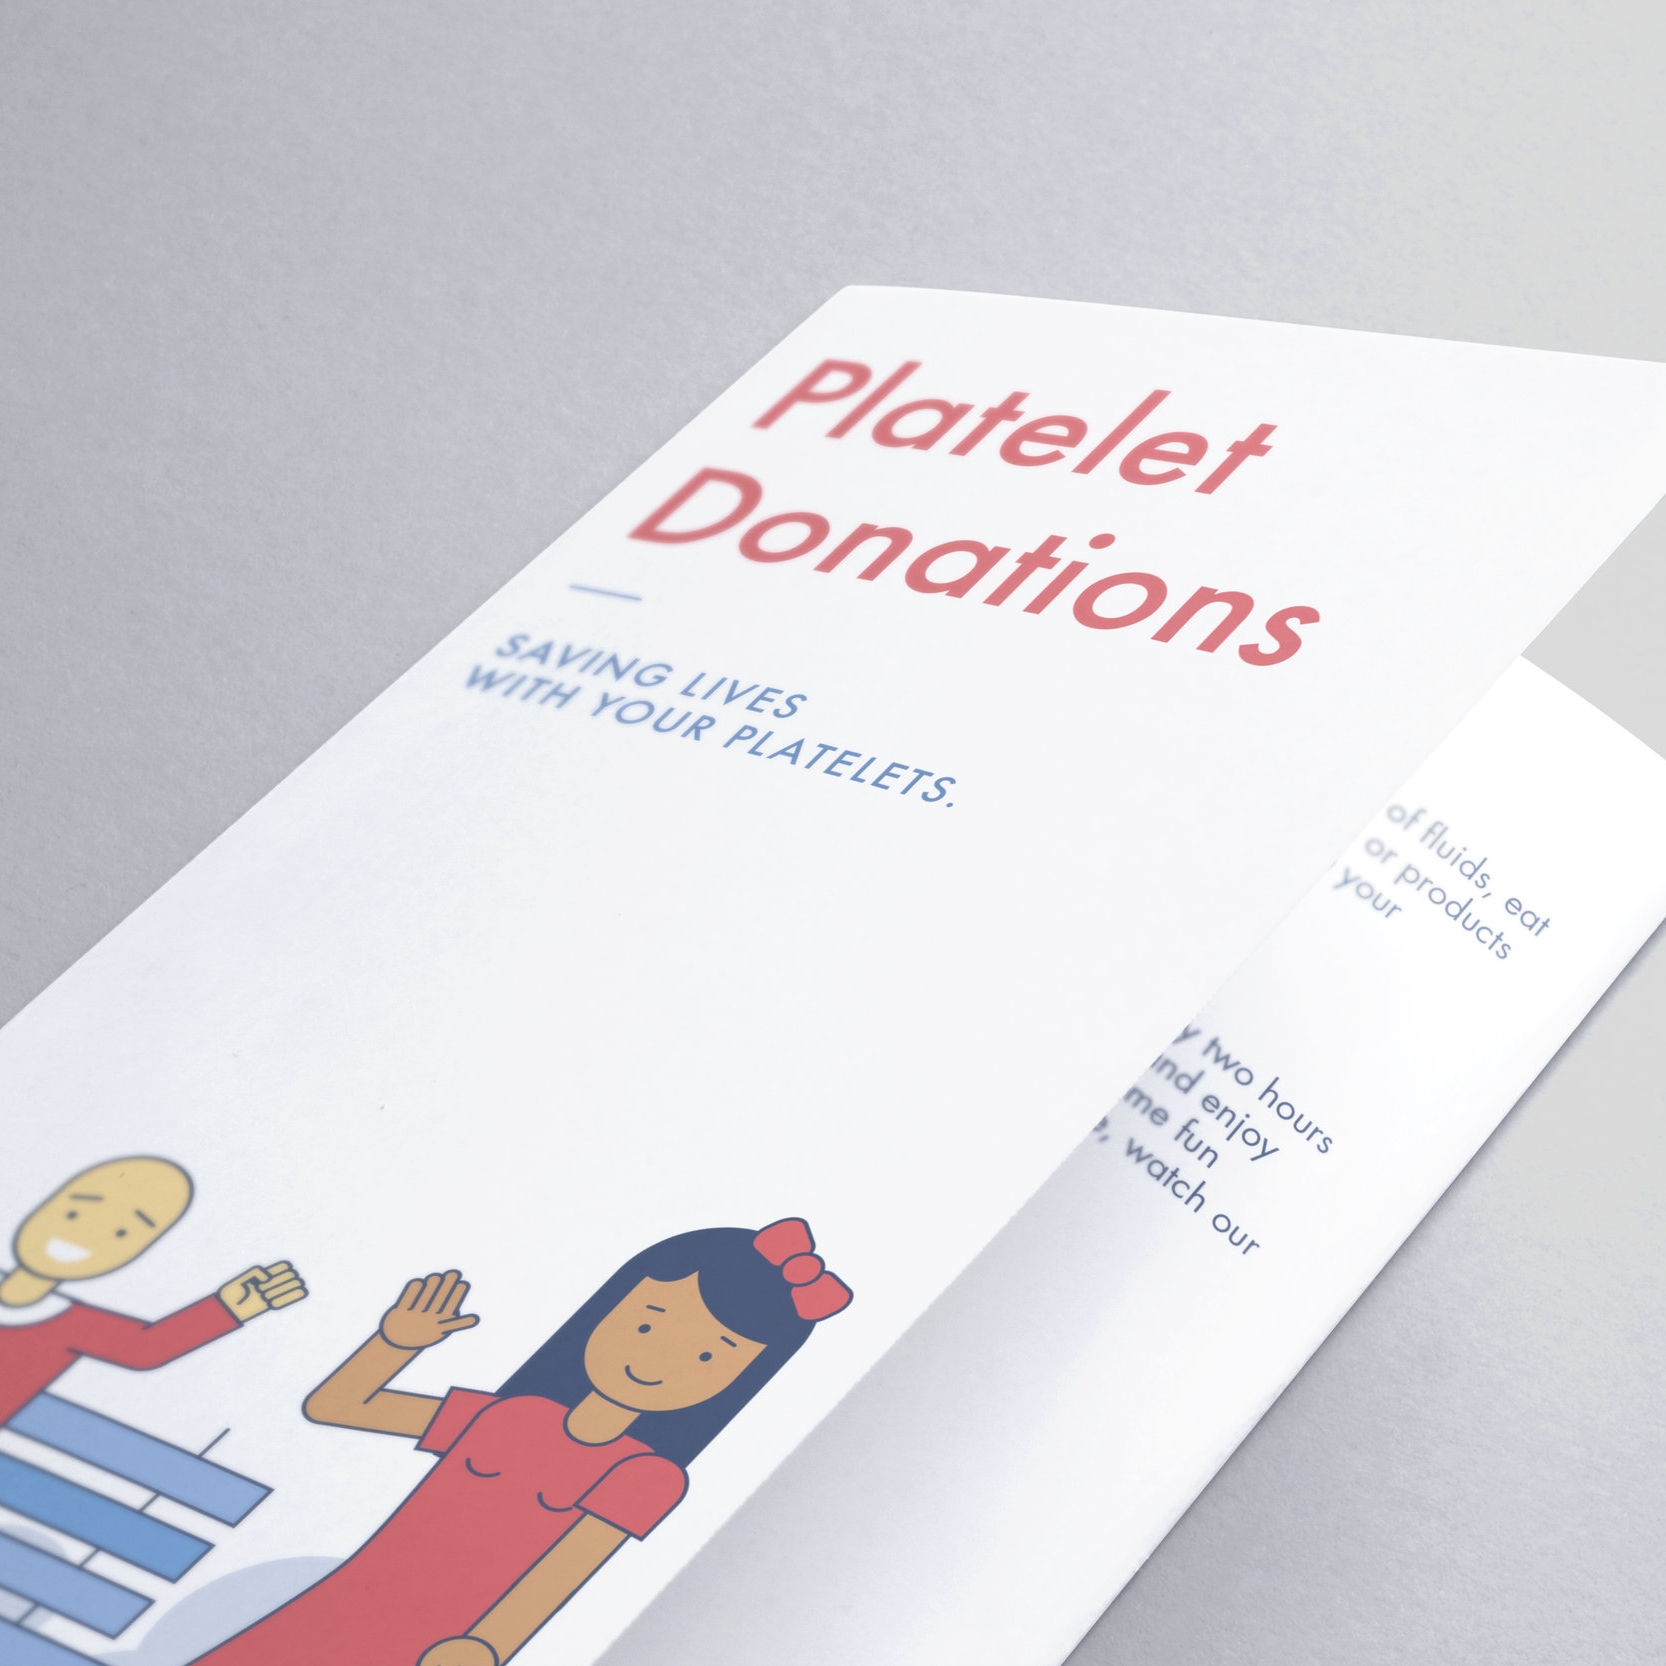 Platelet Donor Campaign